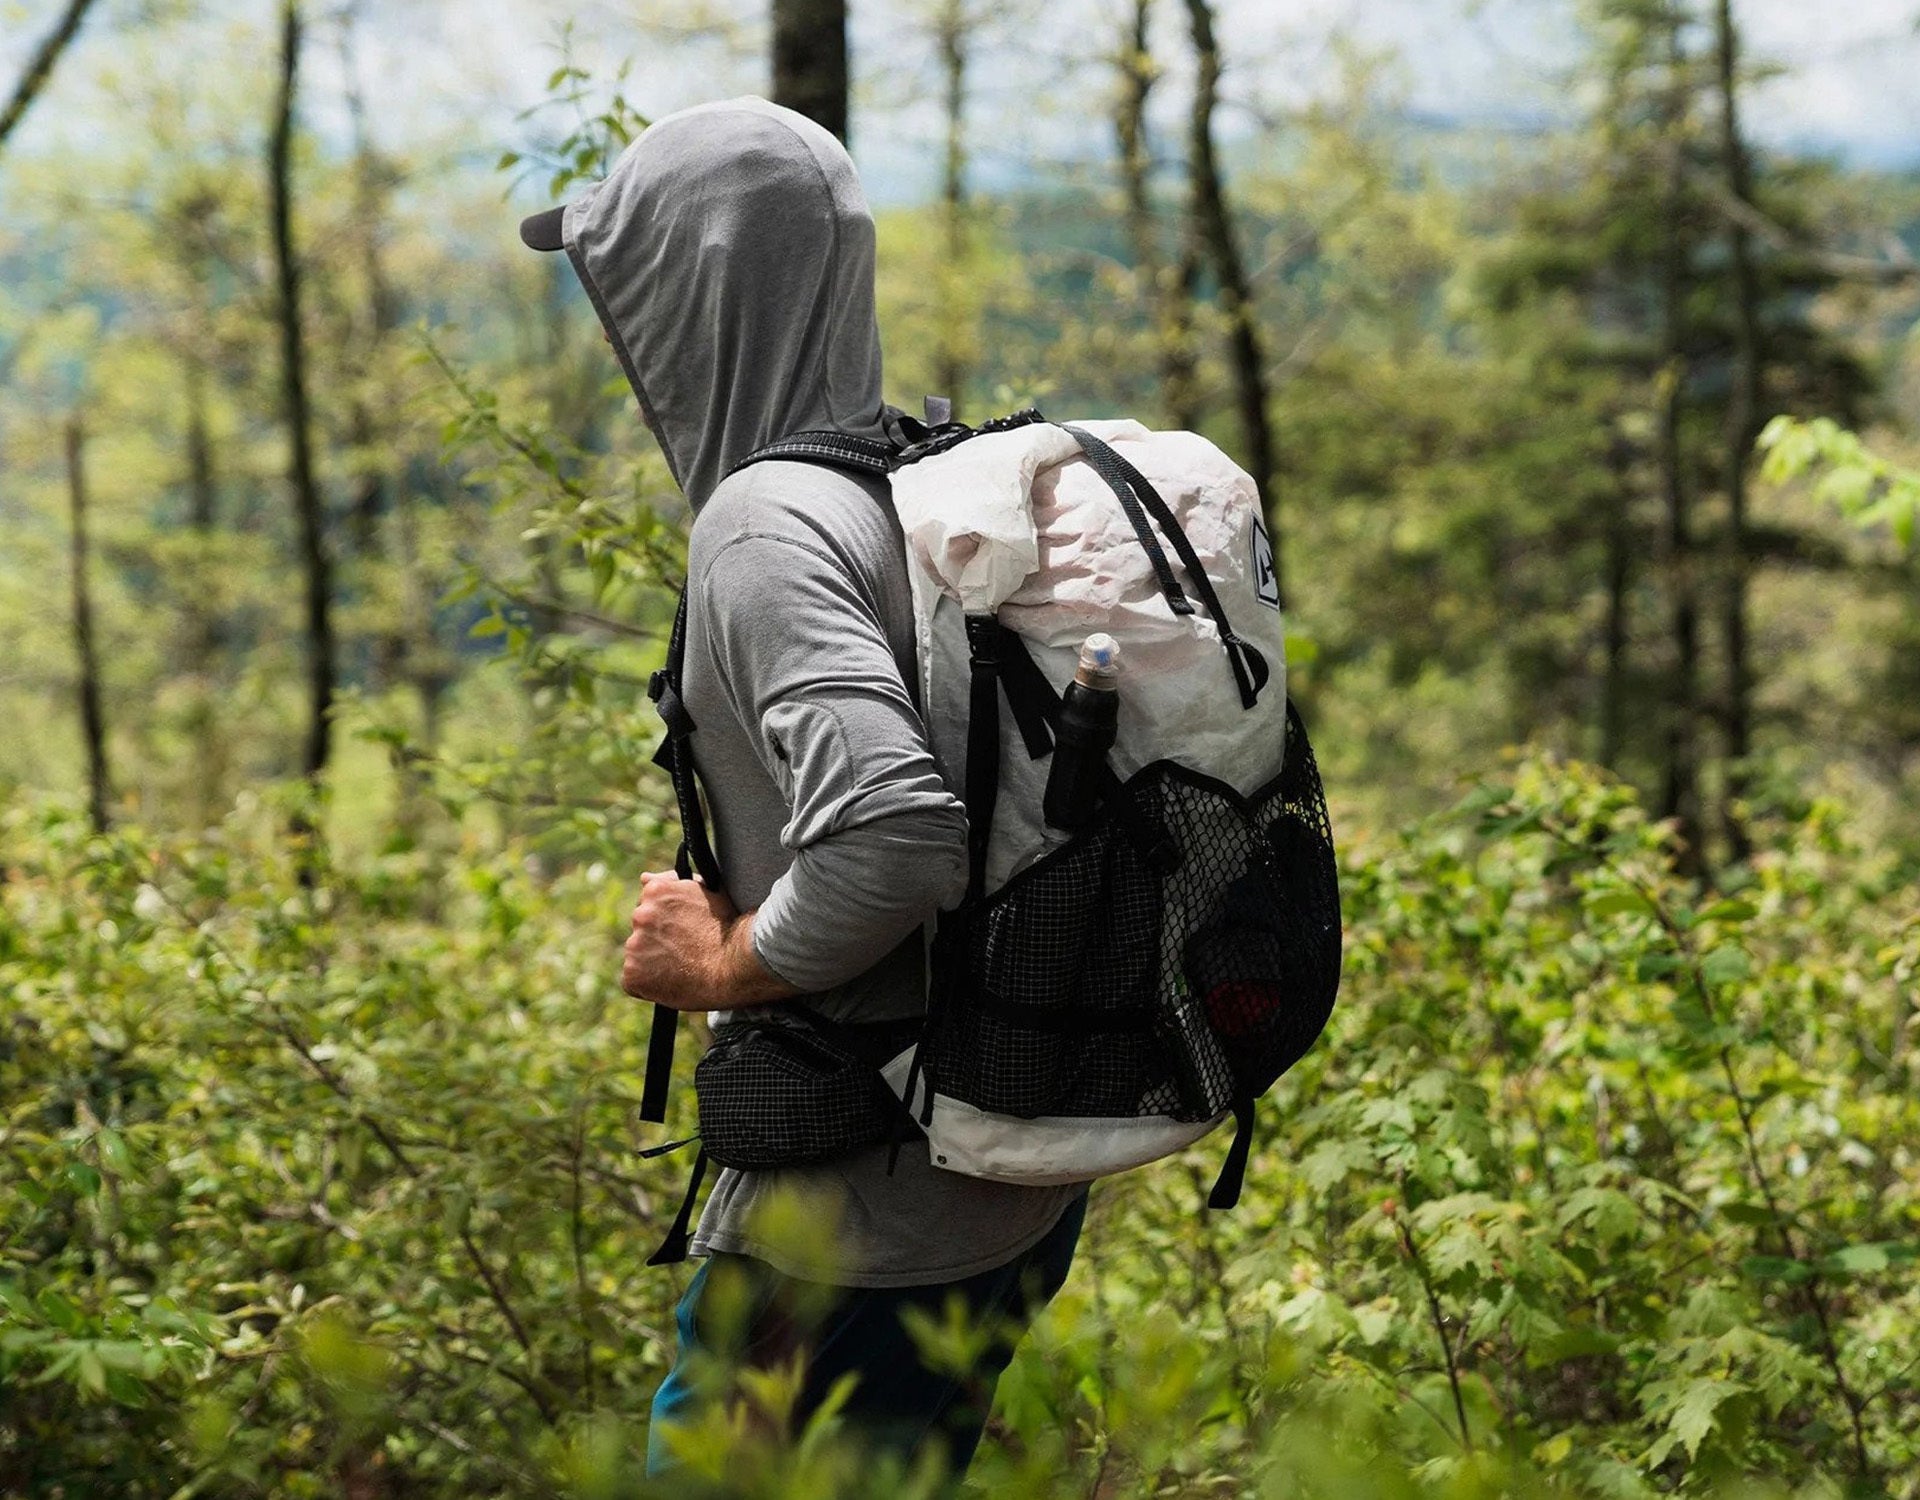 A man walking through the woods with a backpack.